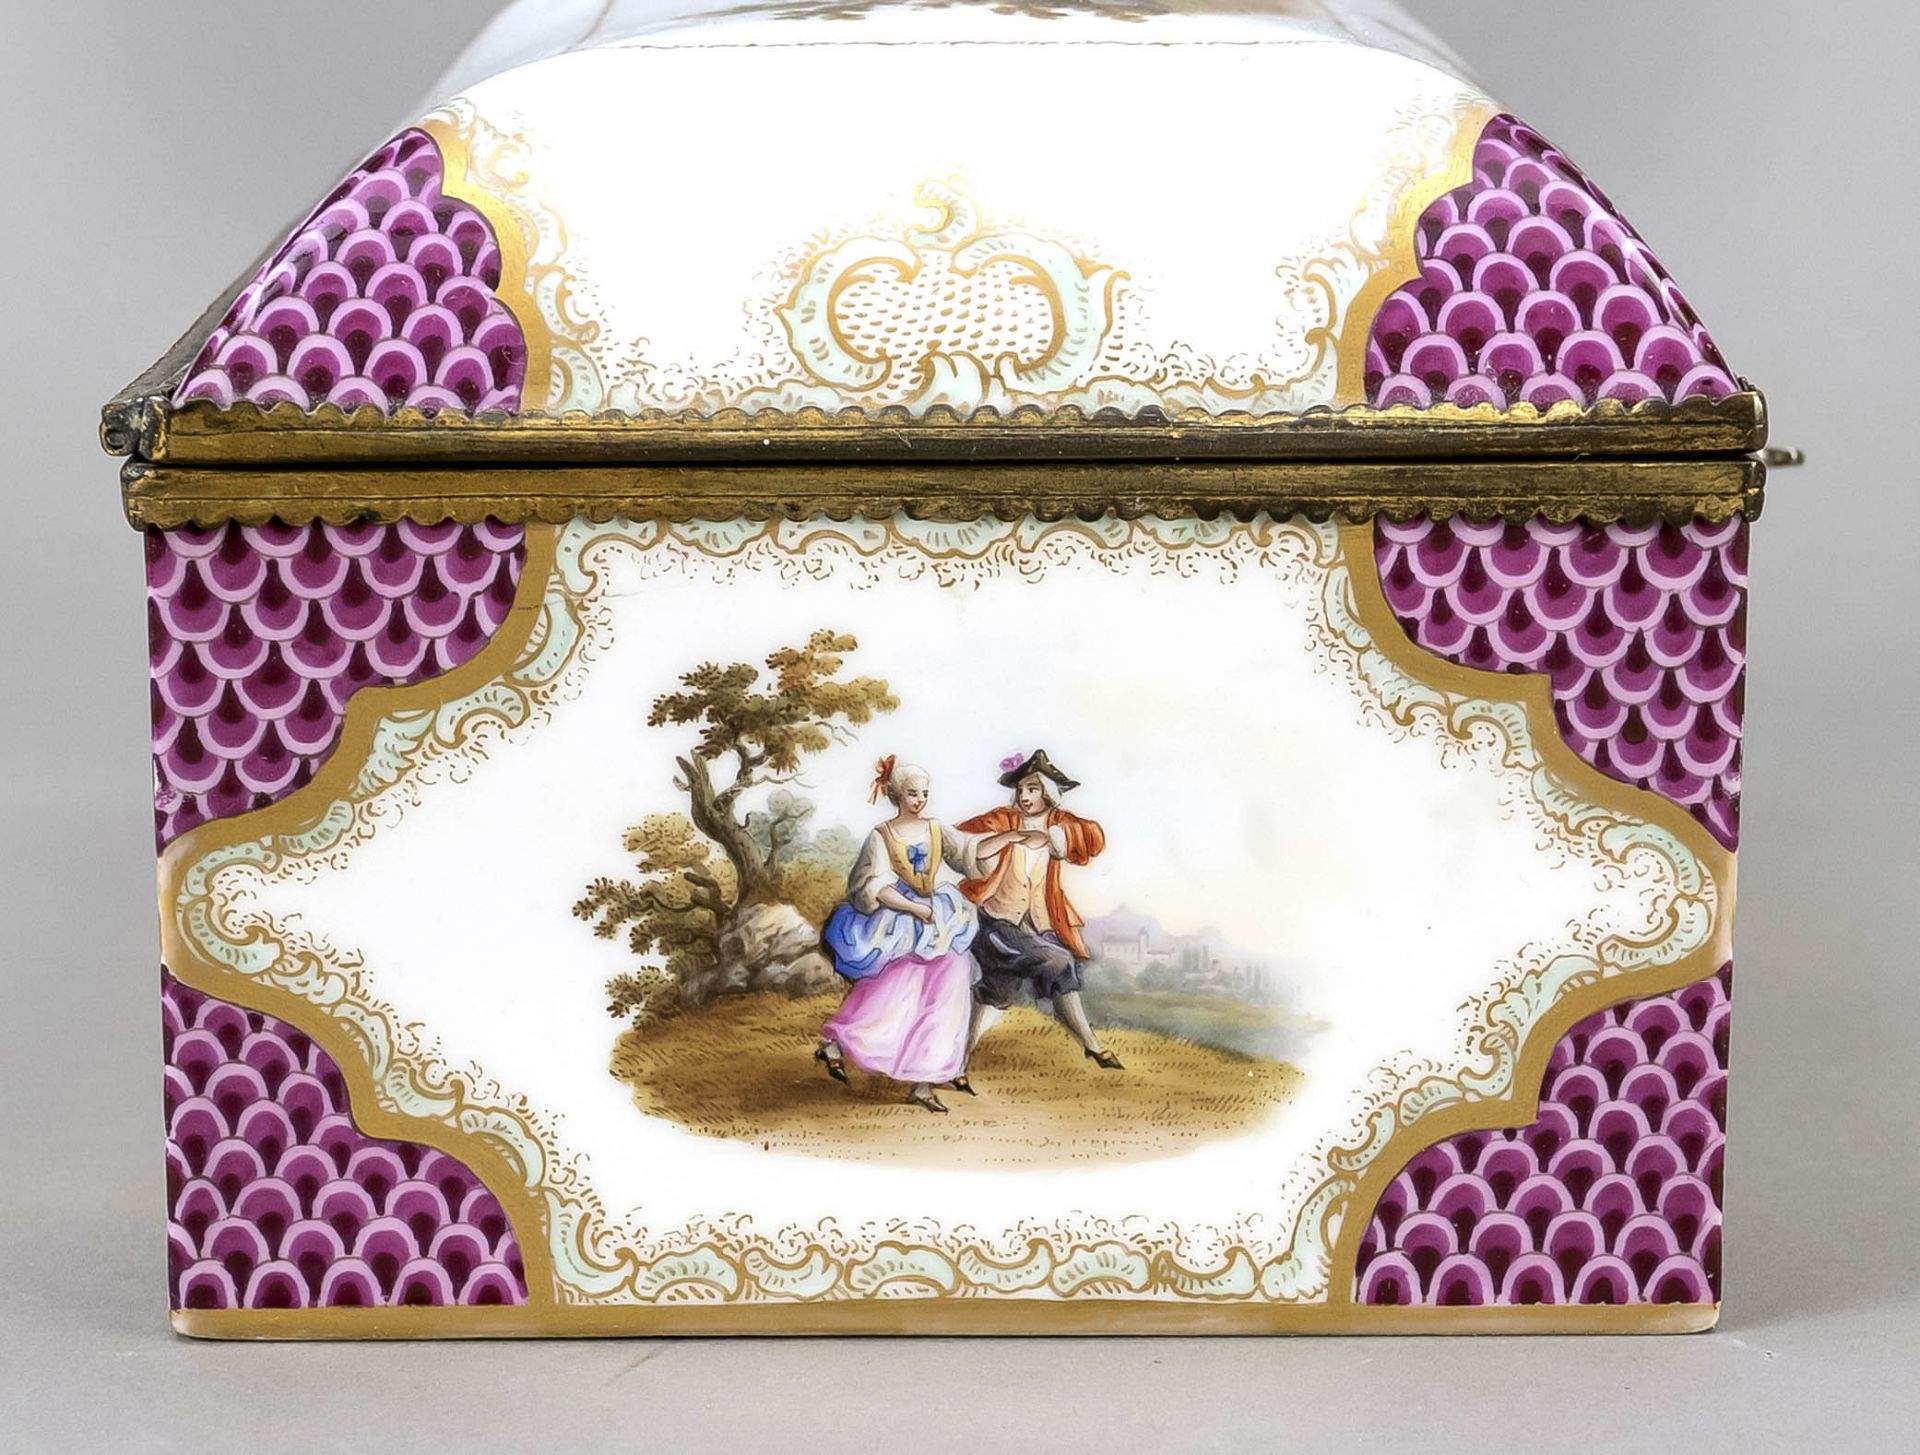 Lidded box in the style of Meissen, w. 18/19th c., fine polychrome painting with gallant couples - Image 5 of 7